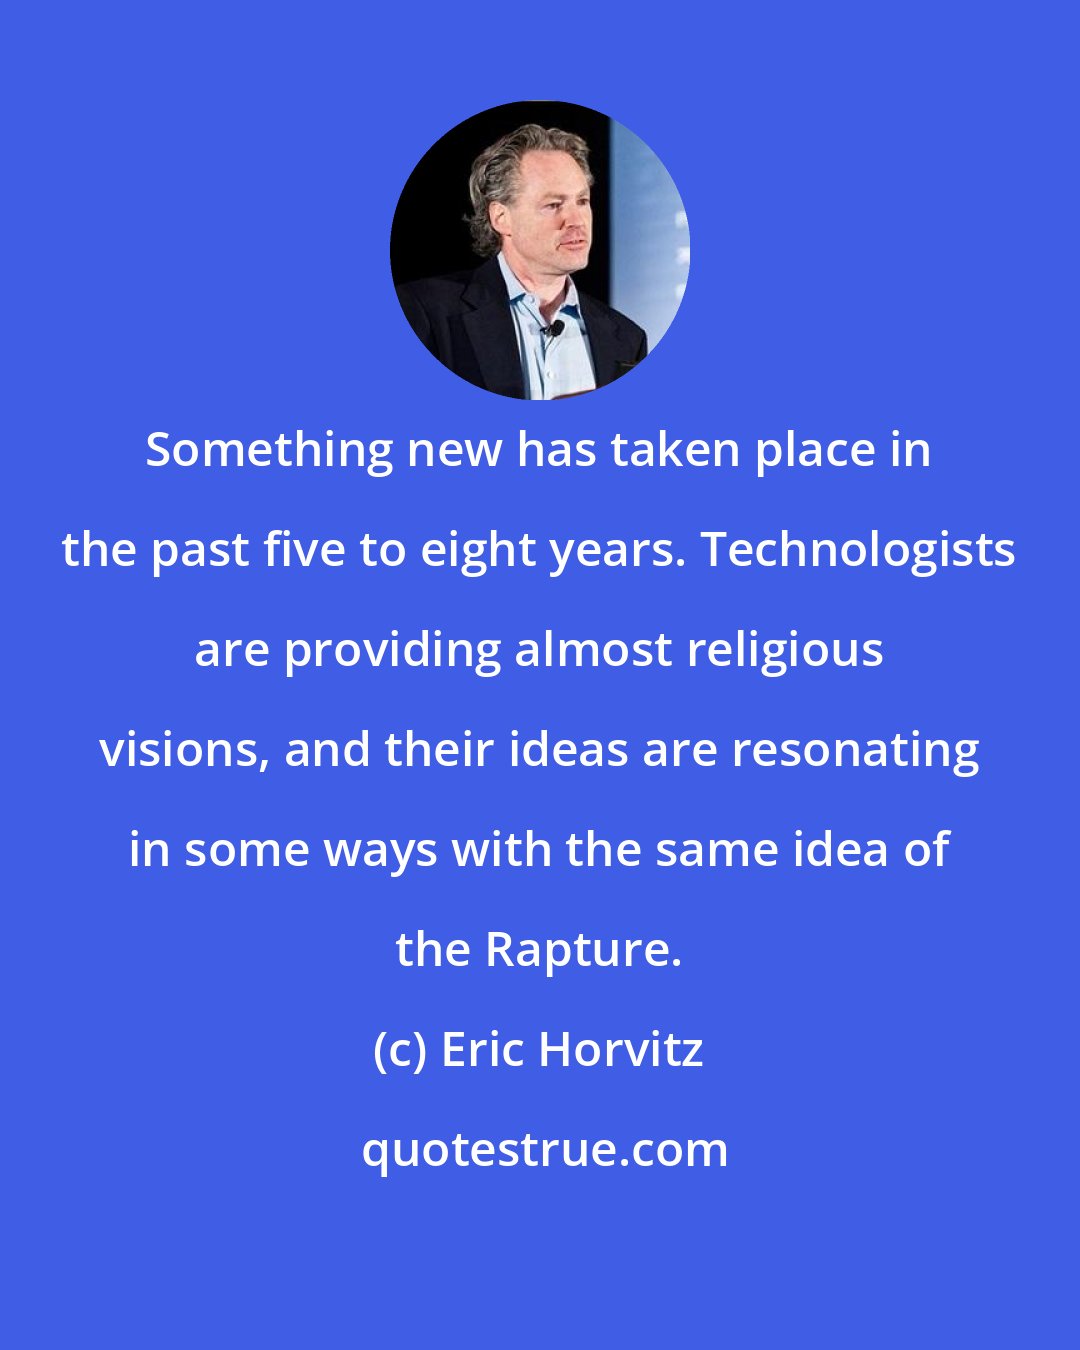 Eric Horvitz: Something new has taken place in the past five to eight years. Technologists are providing almost religious visions, and their ideas are resonating in some ways with the same idea of the Rapture.